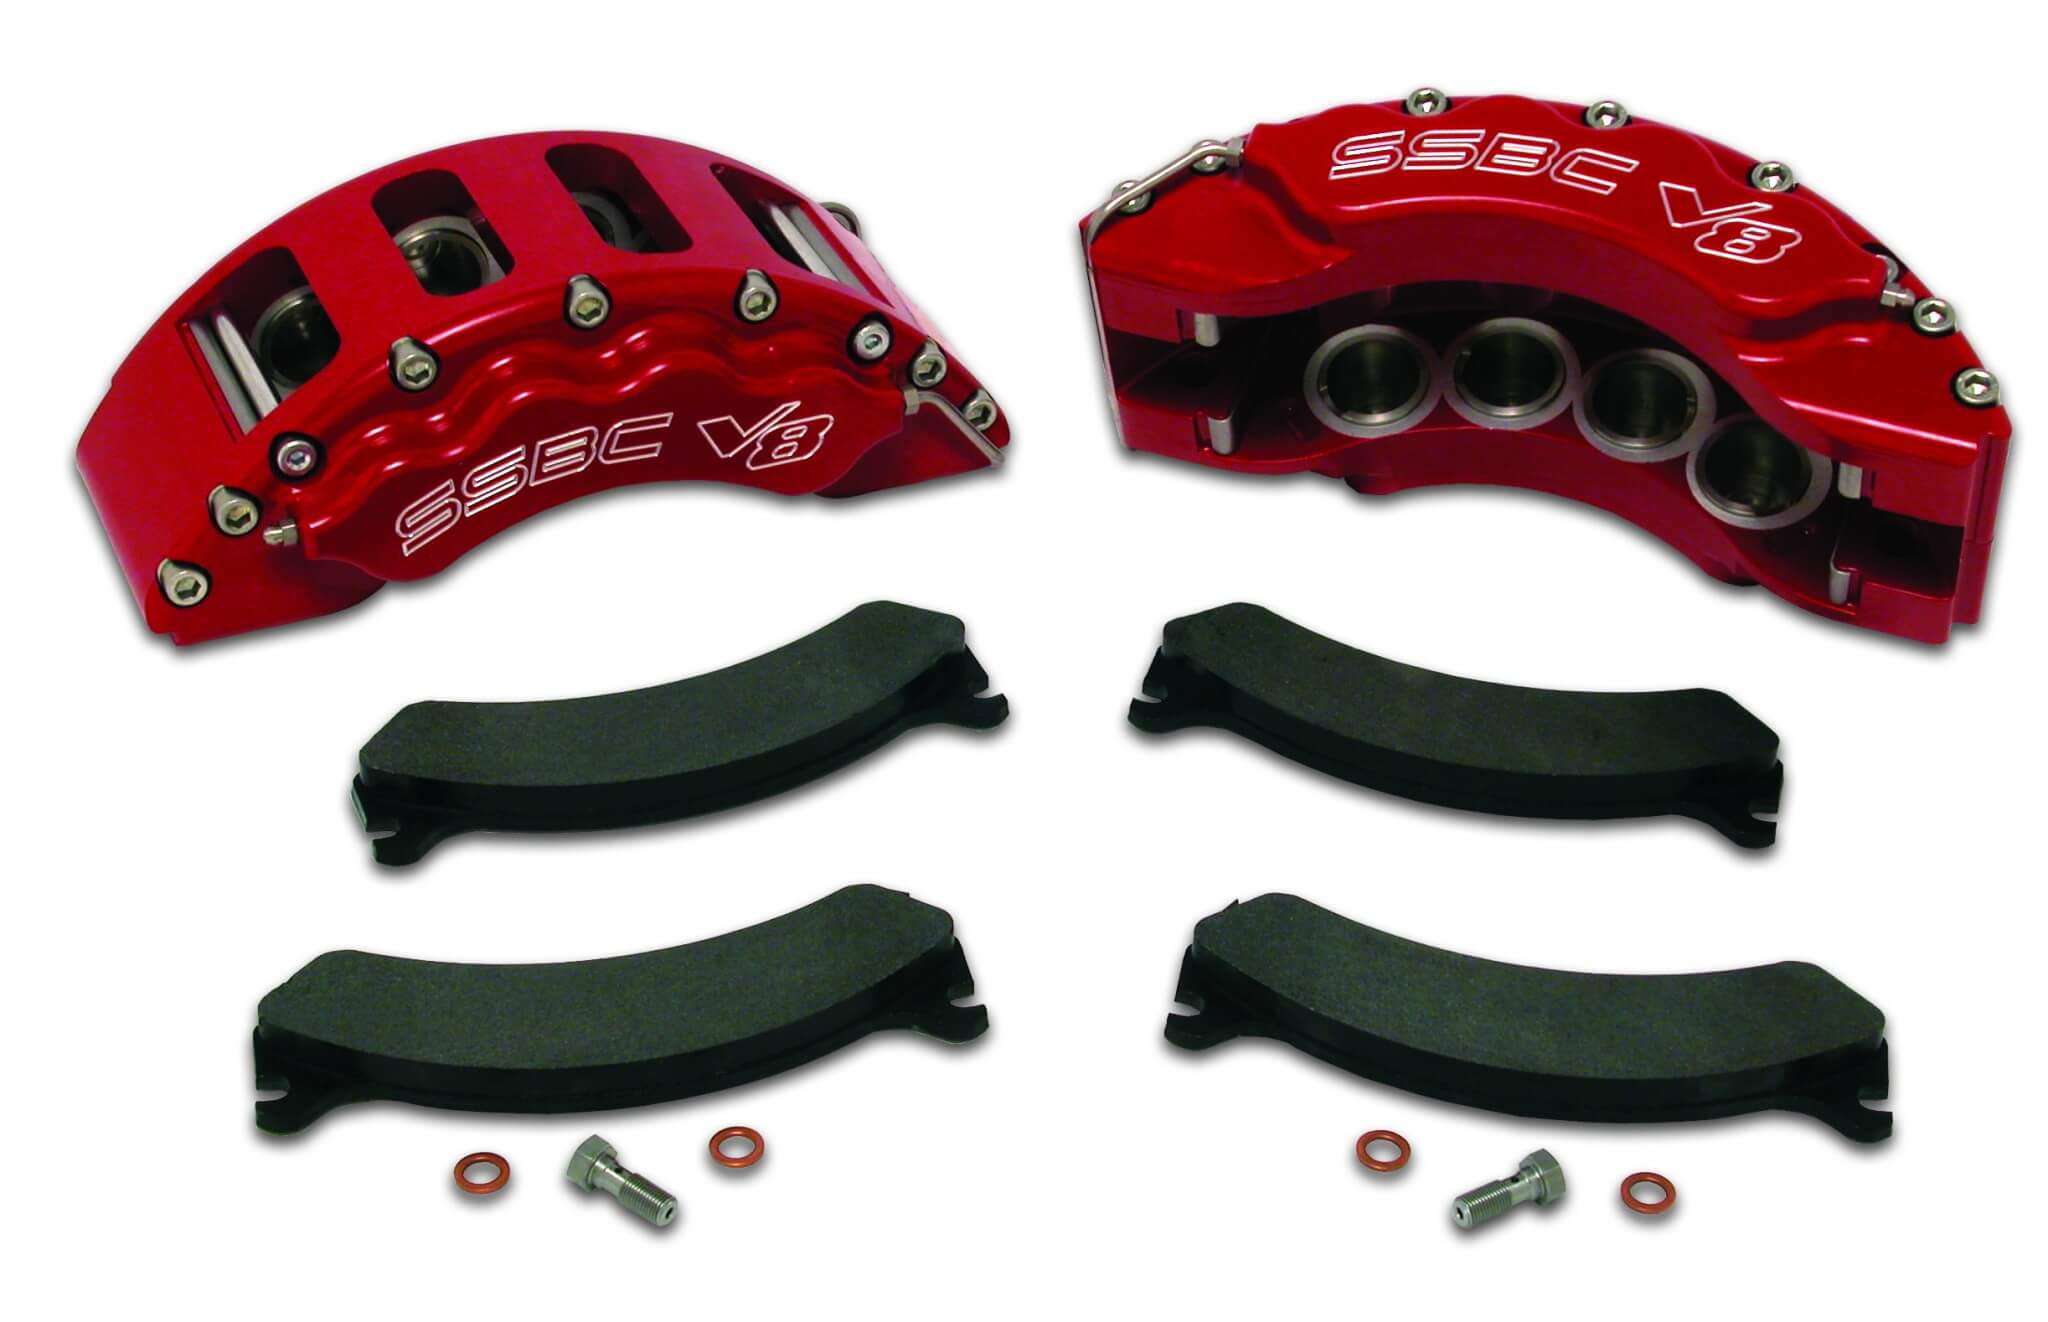 The V8 caliper from SSBC is seen here in bright red. The installation photos show it in black. You can order your calipers in several colors of powder coat; some colors are available through special order. 